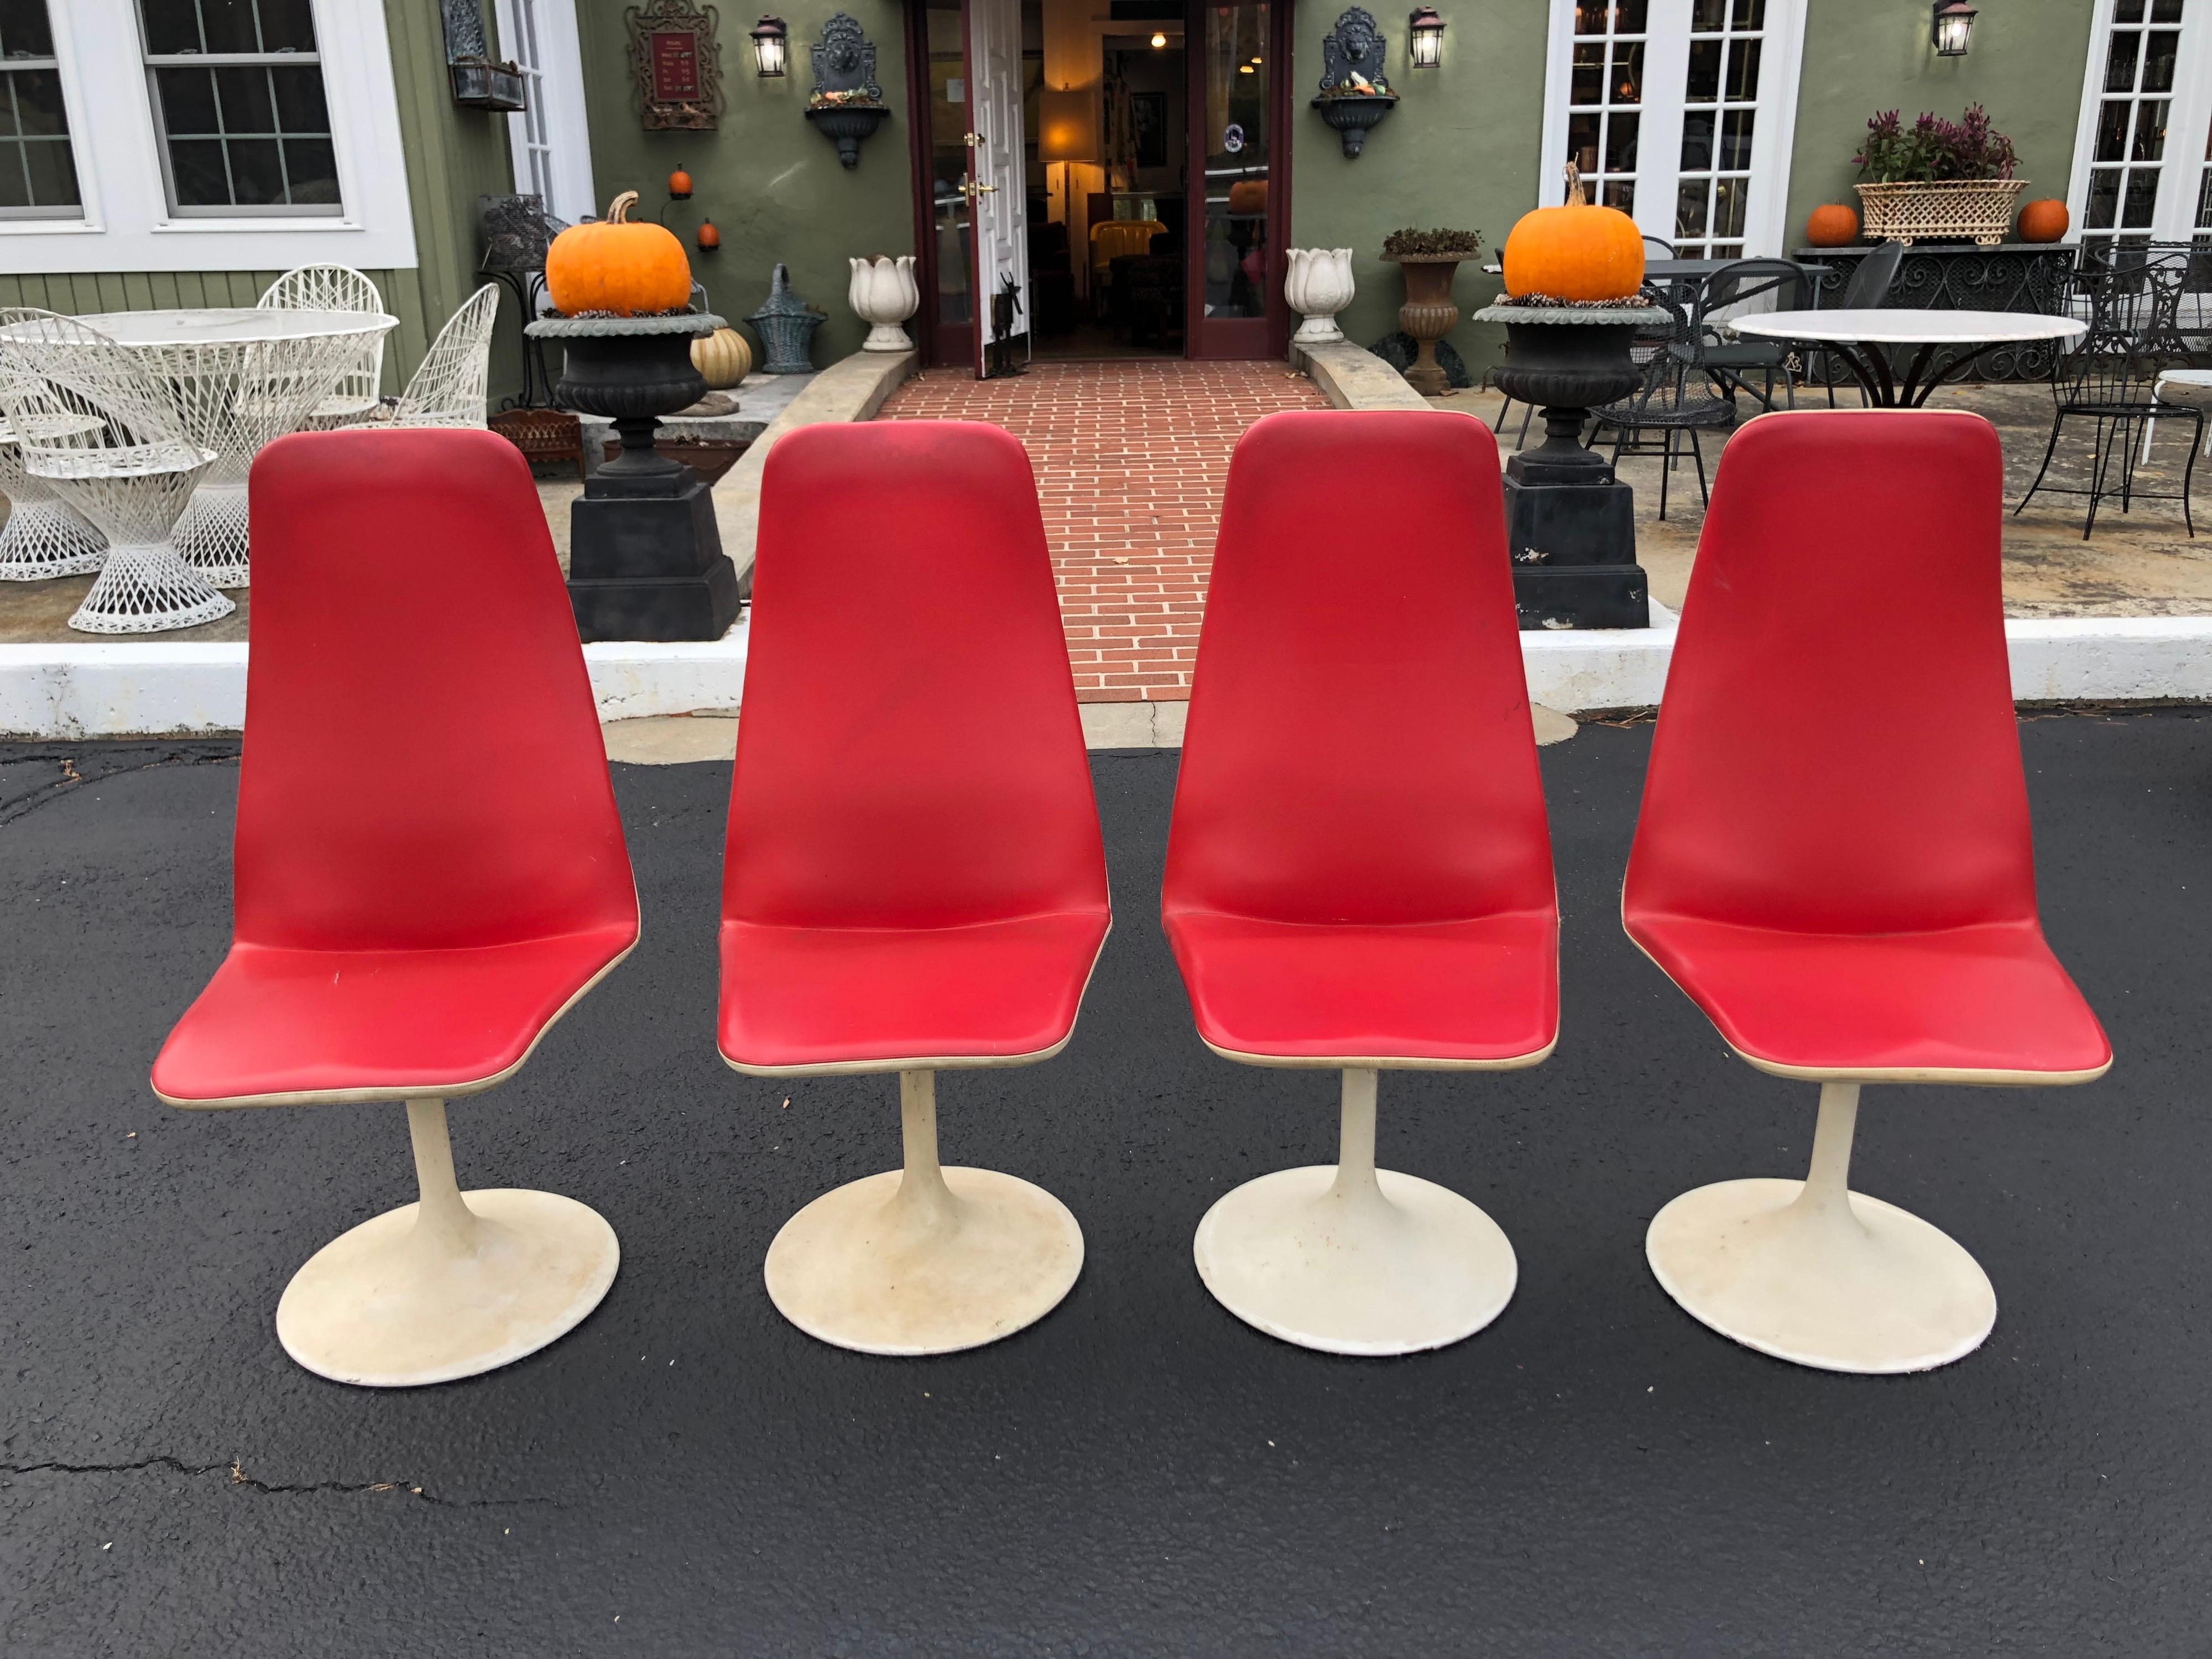 Set of Four Mid-Century Modern swivel chairs by Swedish designer Borje Johanson. In fire engine red with crème contrast. These chairs are entitled 